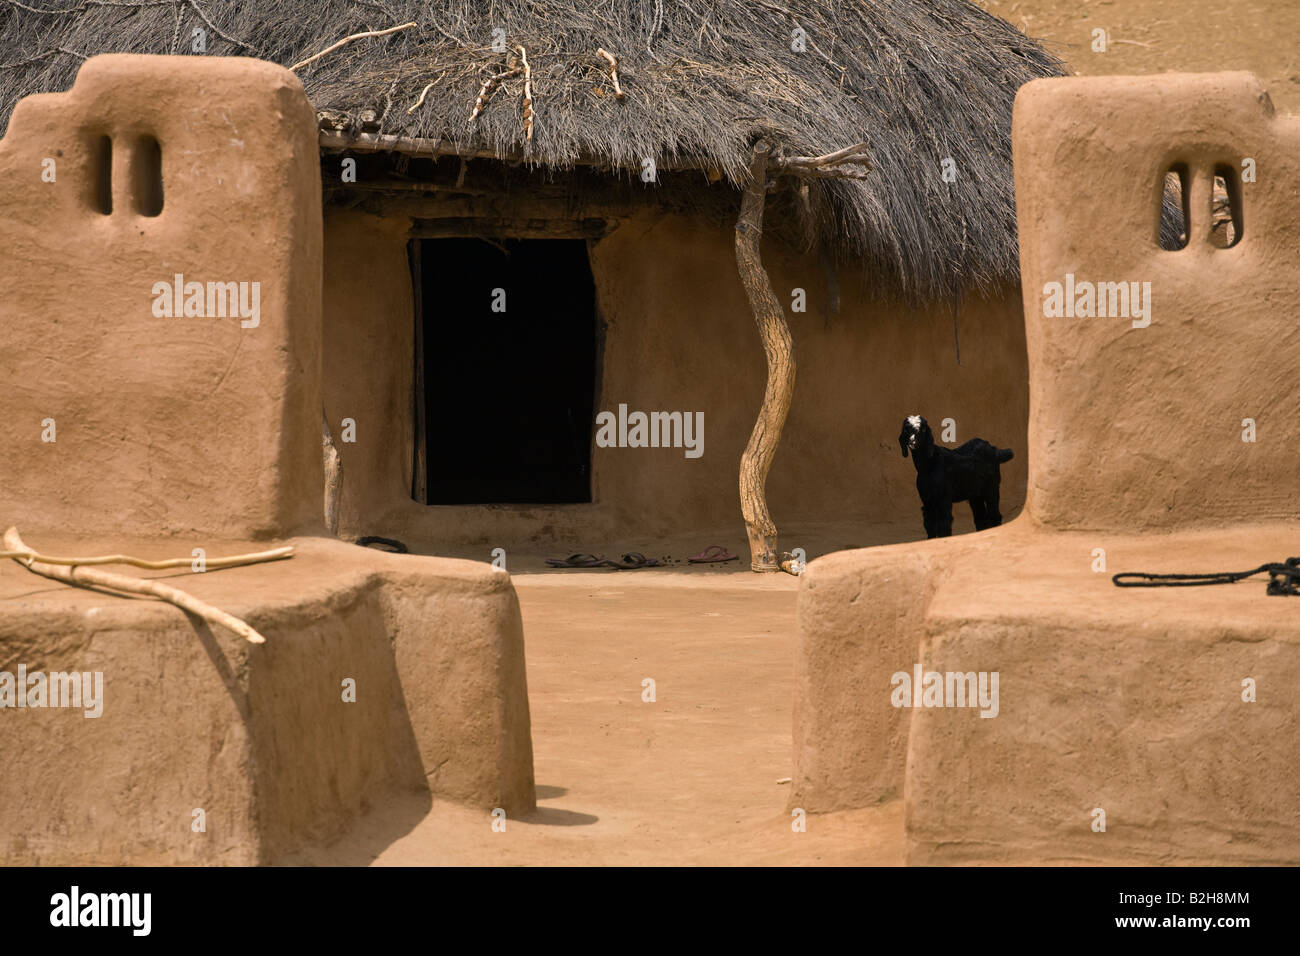 A classic MUD HOUSE with a GOAT in the village in the THAR DESERT near JAISALMER RAJASTHAN INDIA Stock Photo